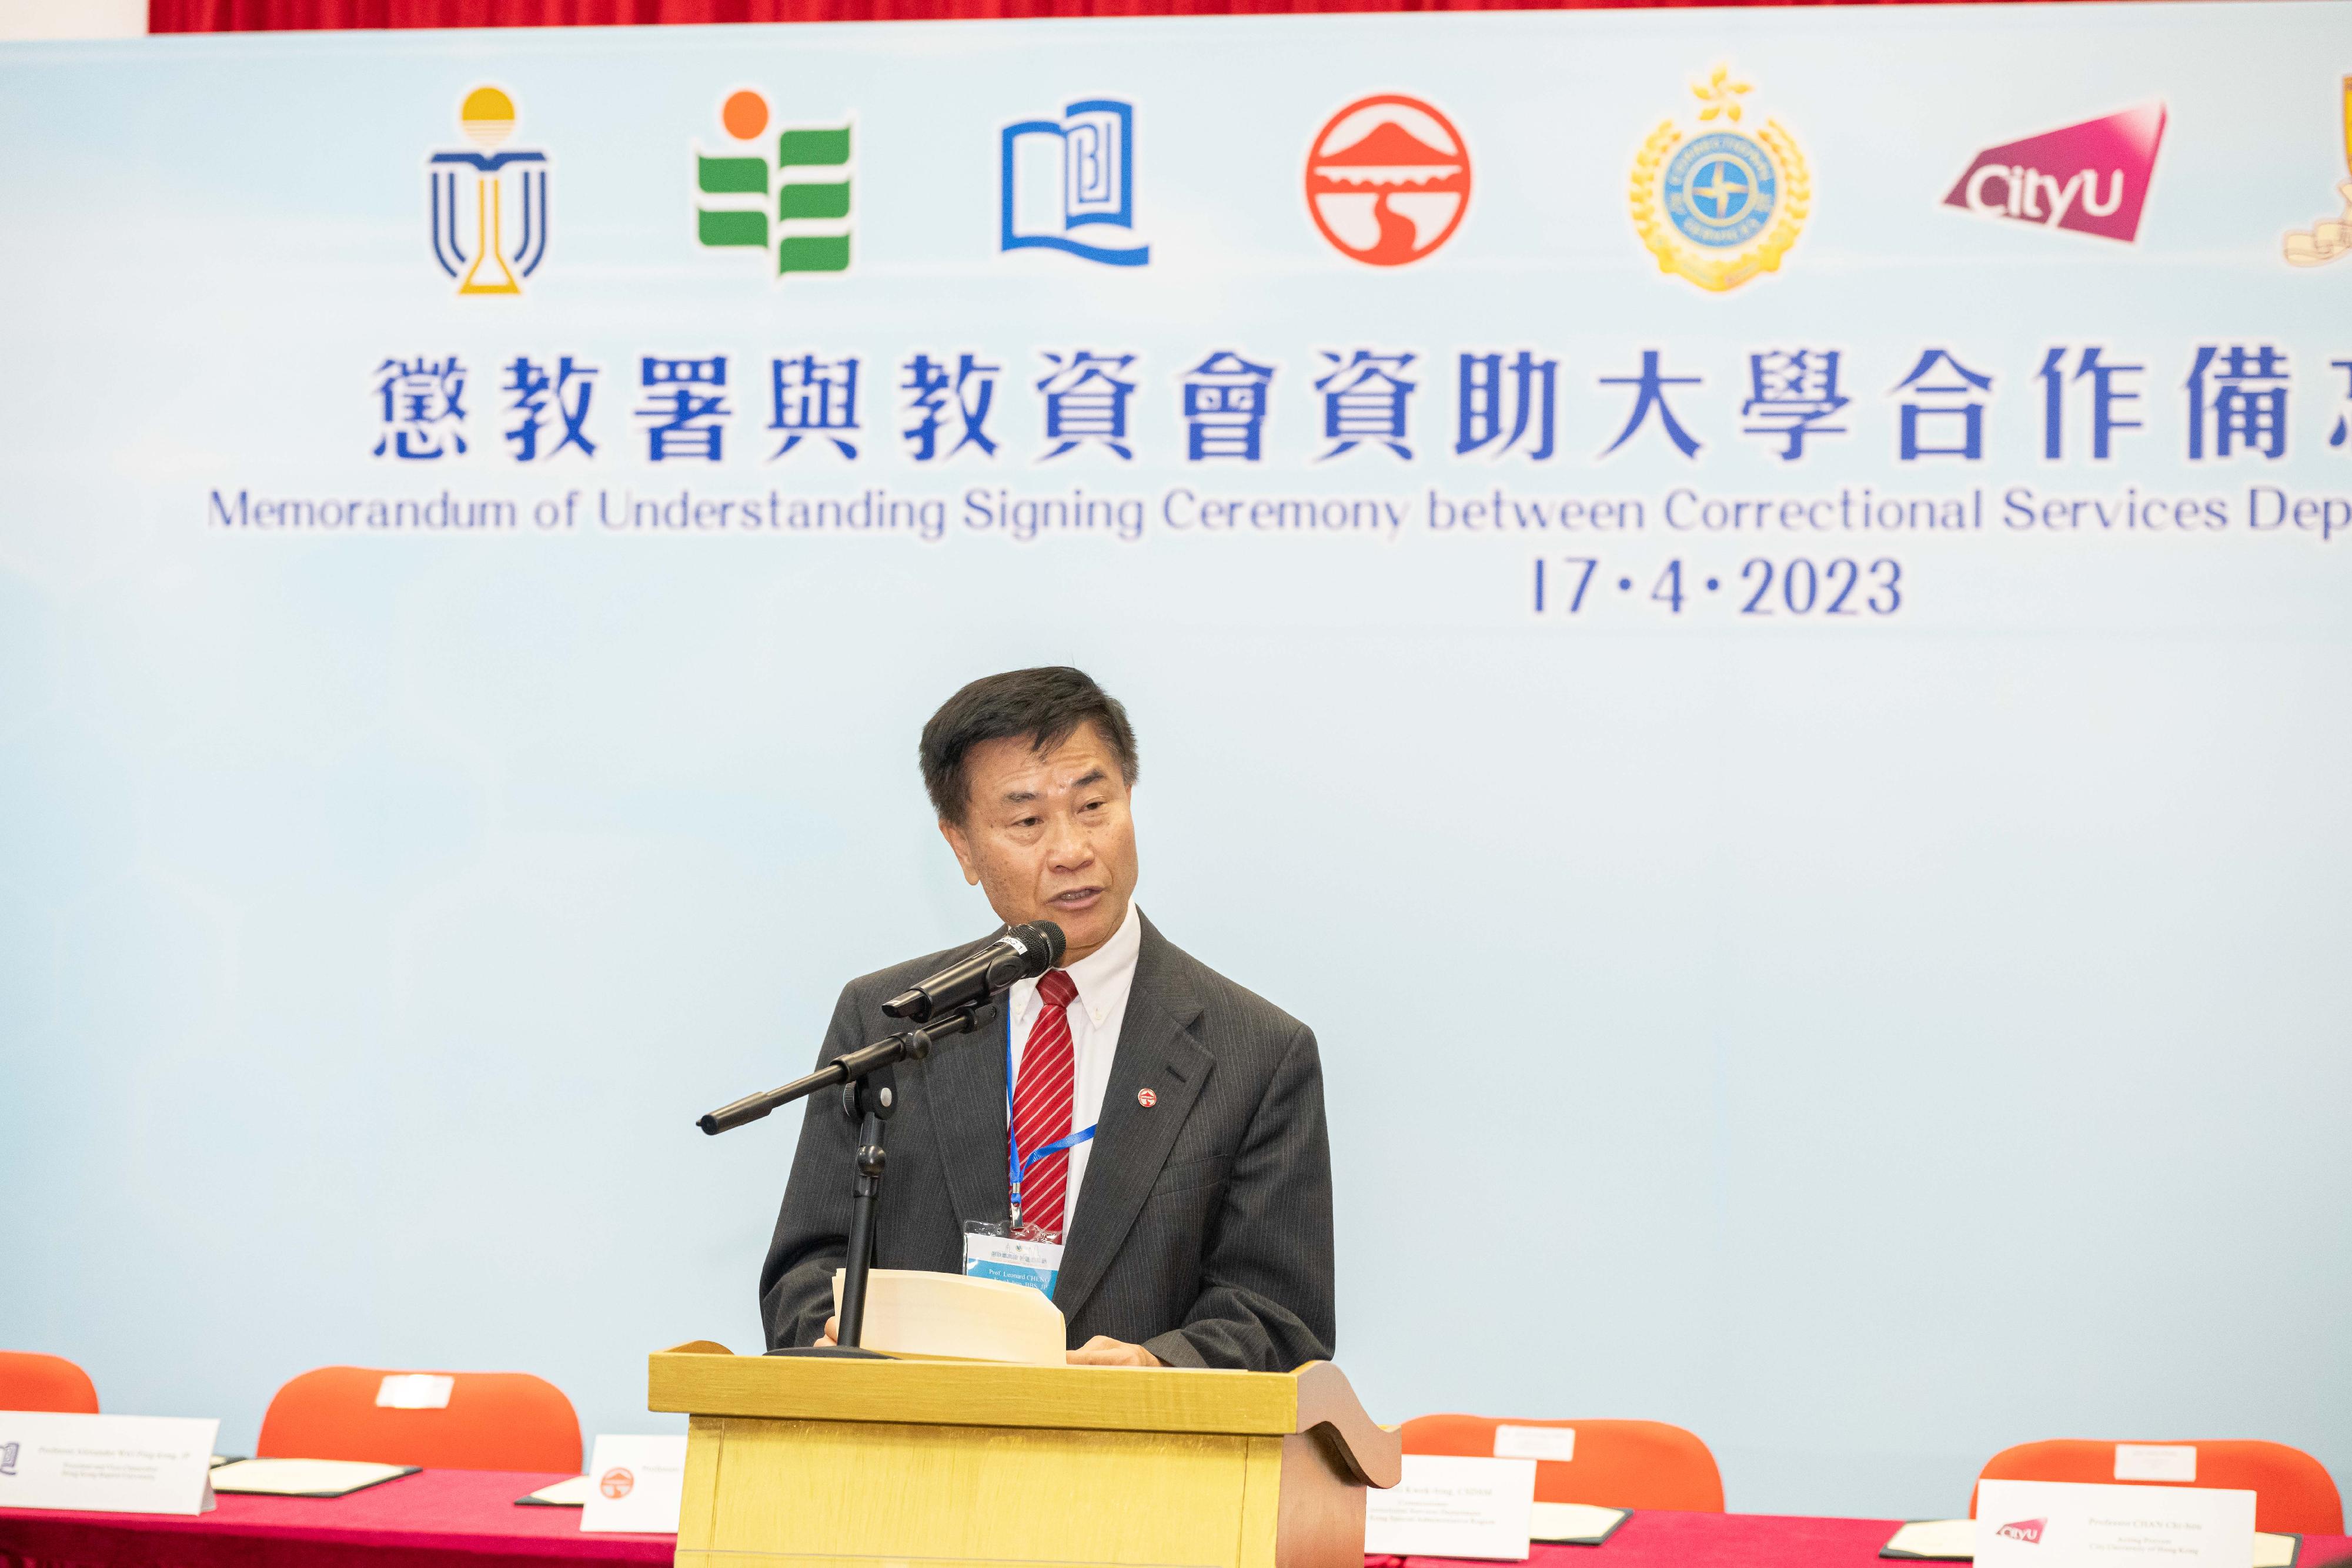 The Correctional Services Department and eight University Grants Committee-funded universities signed a Memorandum of Understanding today (April 17) to facilitate the continuous education of persons in custody who were students of the universities before imprisonment and wish to continue their studies. Photo shows the Convenor of the Heads of Universities Committee and the President of Lingnan University, Professor Leonard Cheng, delivering a speech at the signing ceremony.